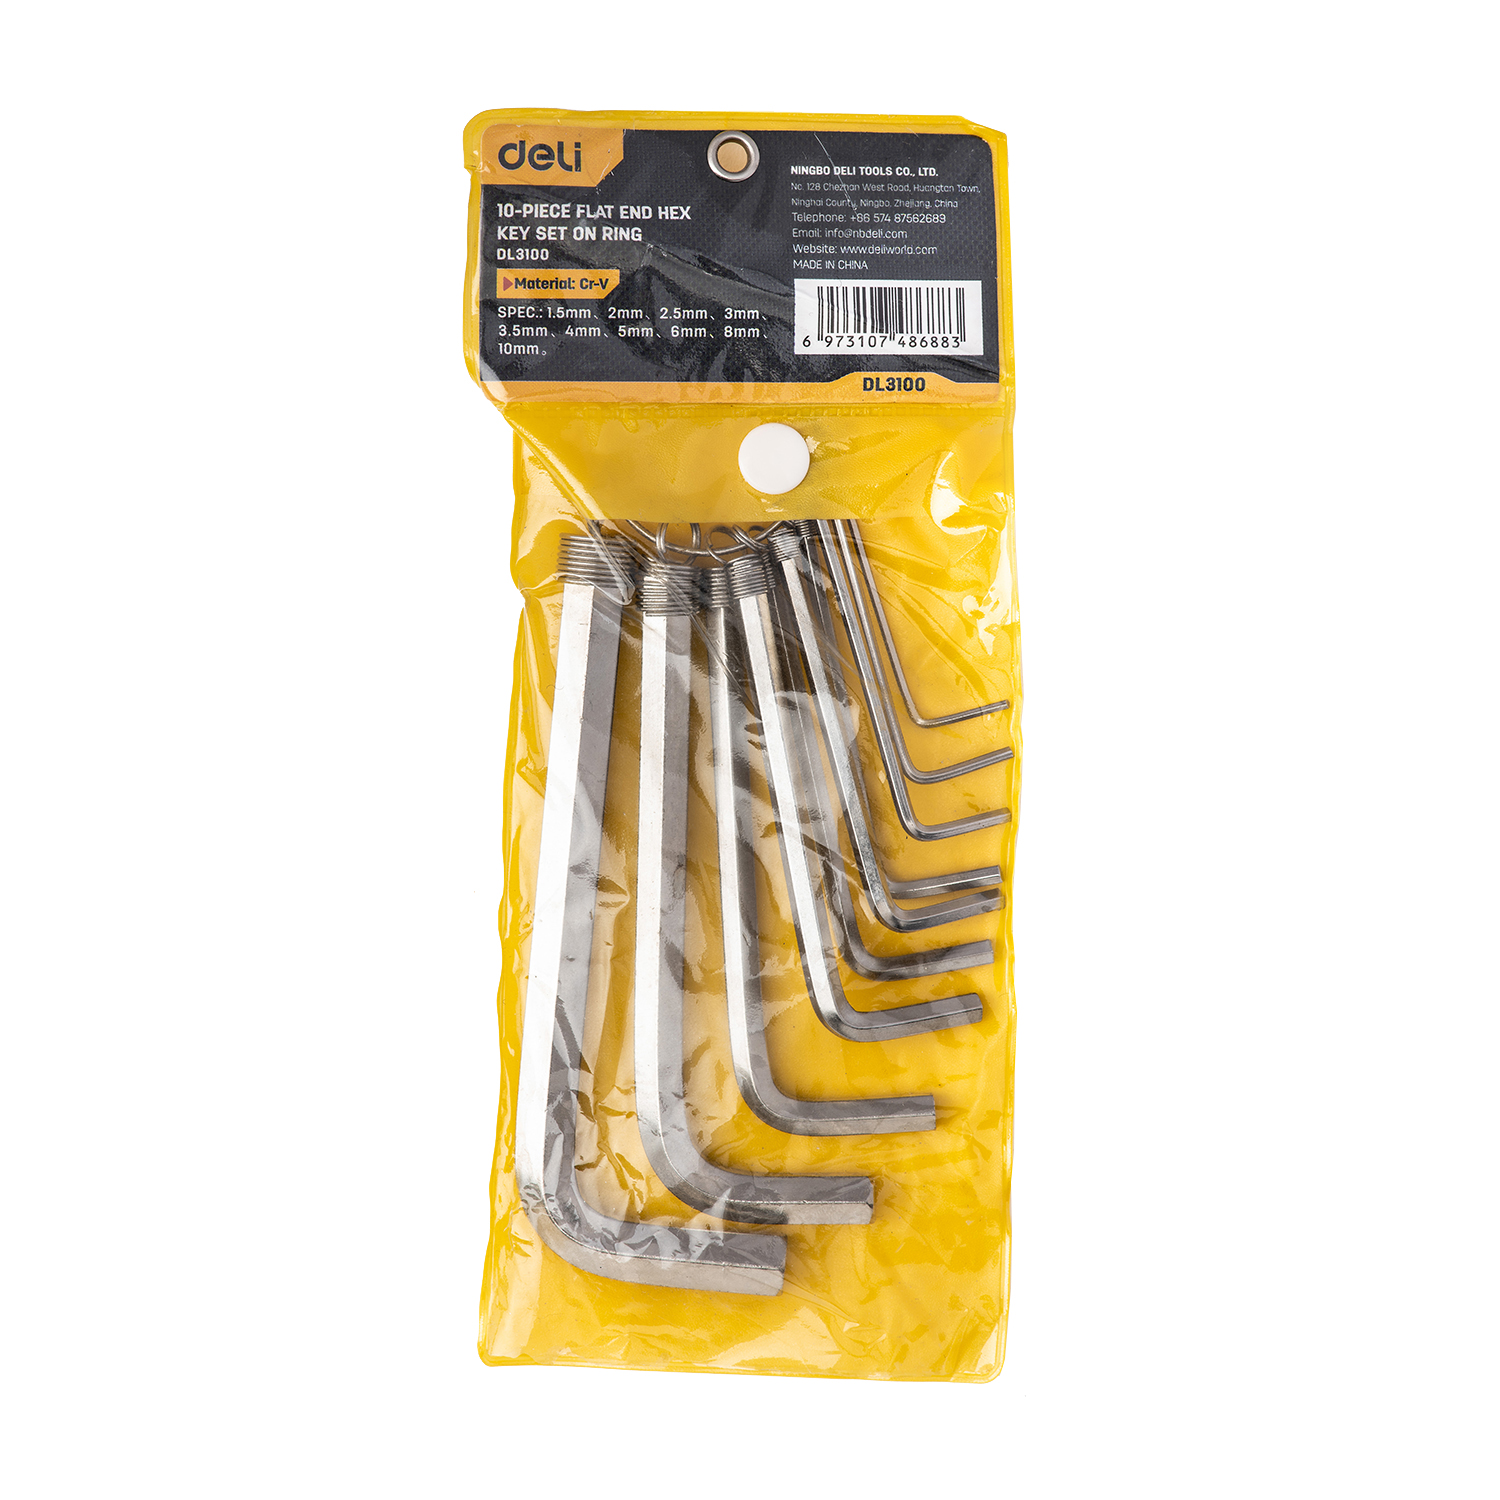 insulated Hex Keys with flat end for Install